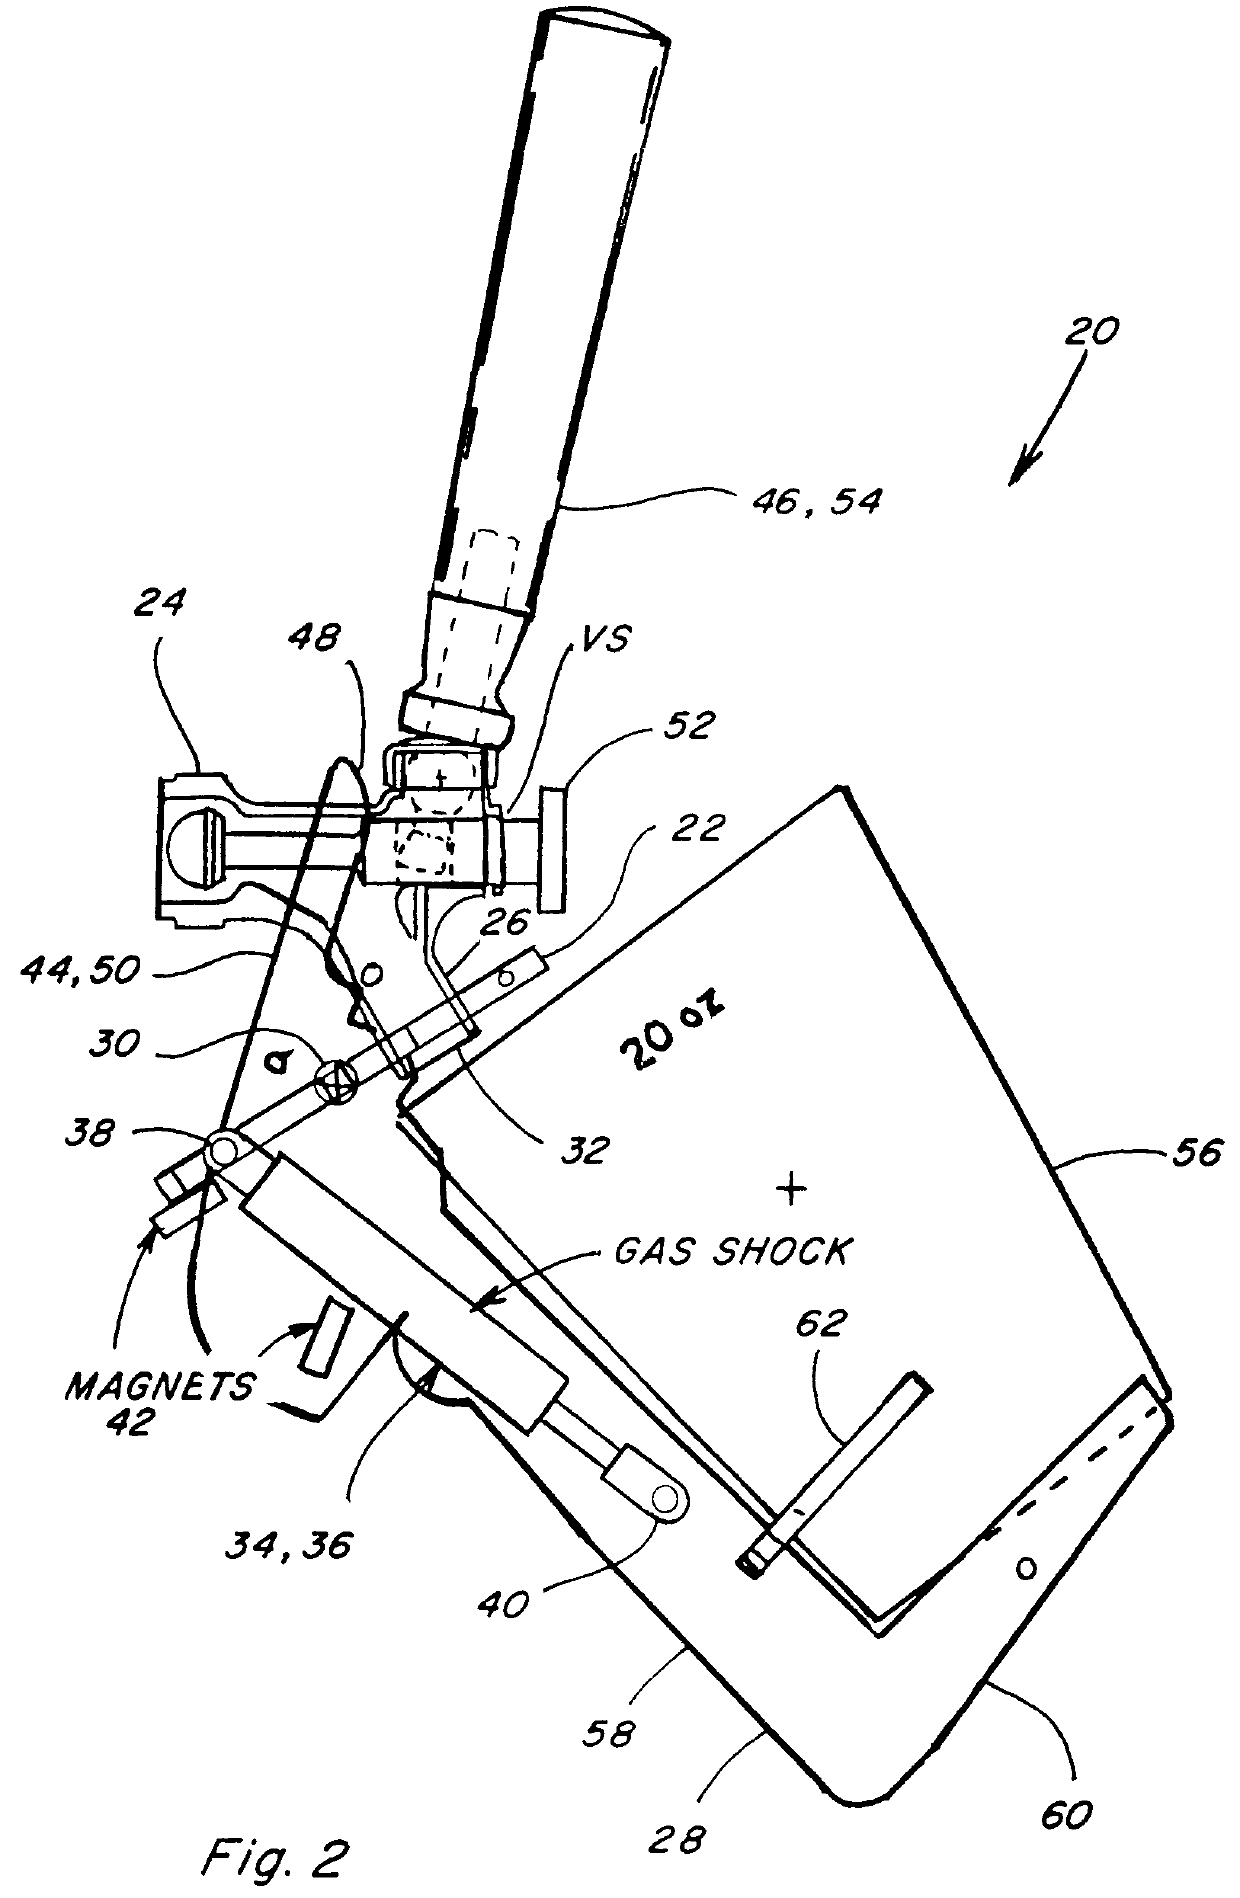 Tilter for holding a container in a progressively less tilted orientation while receiving a beverage from a dispensing system